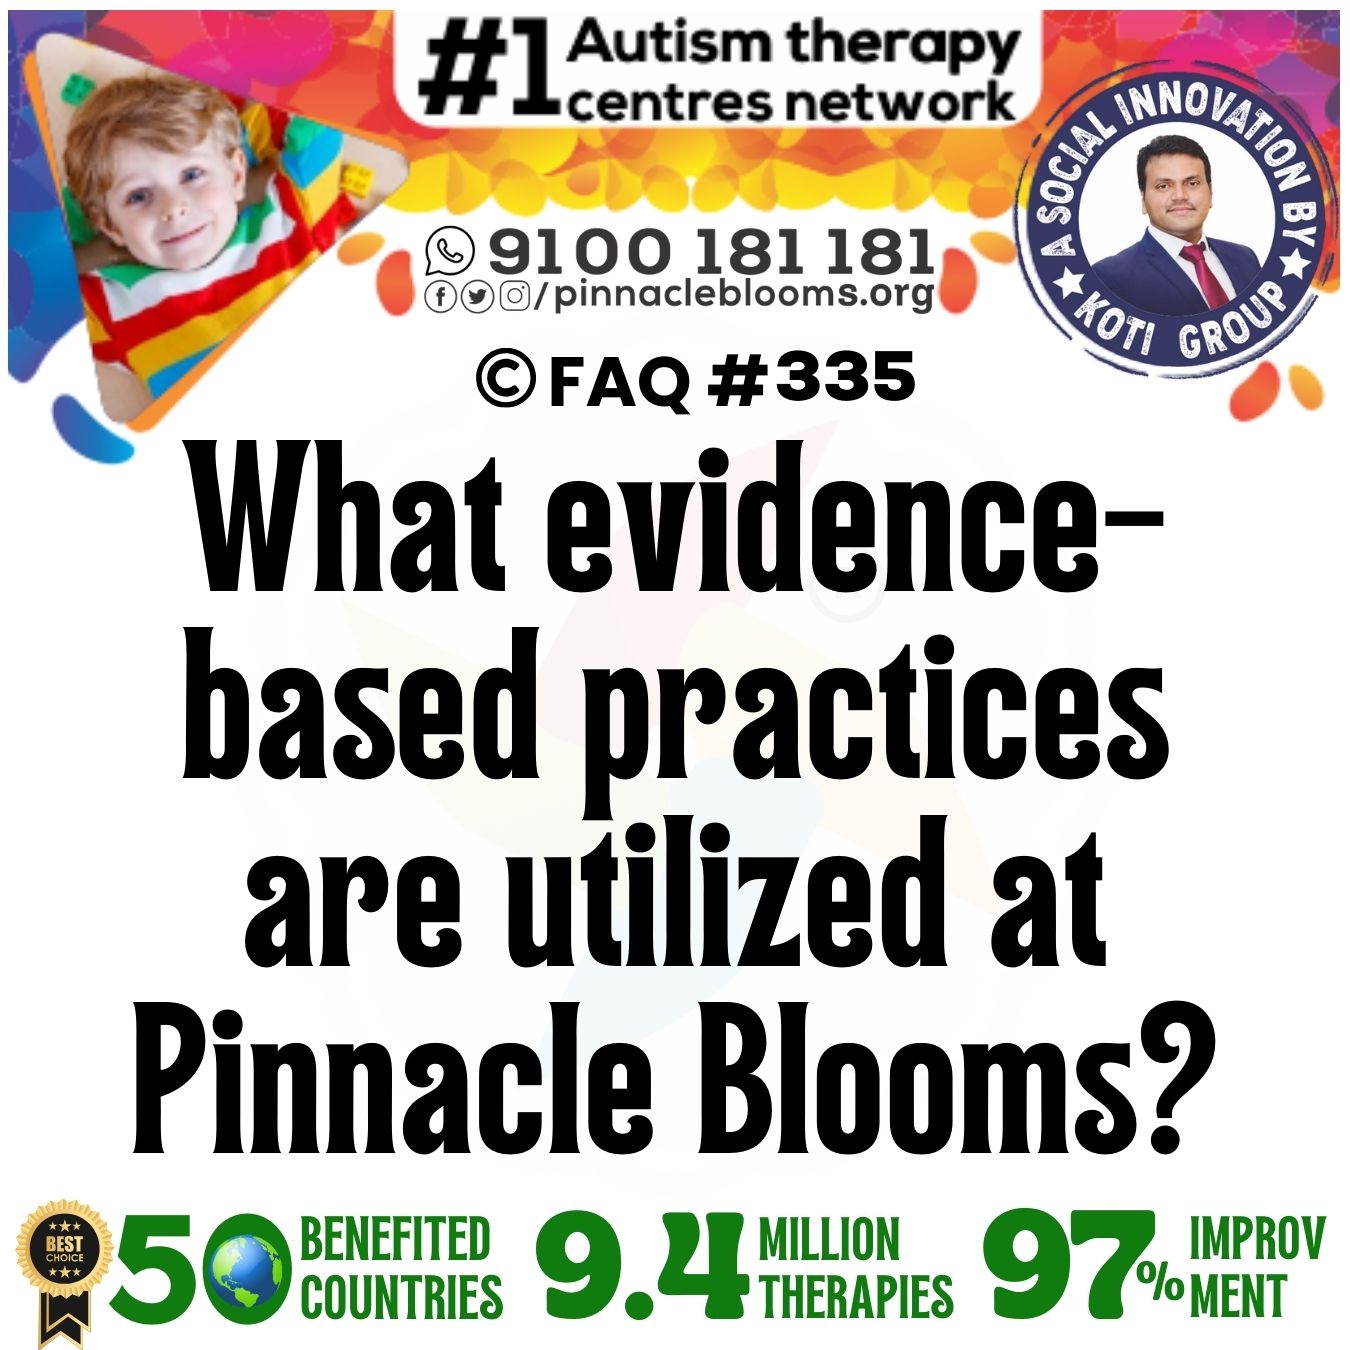 What evidence-based practices are utilized at Pinnacle Blooms?